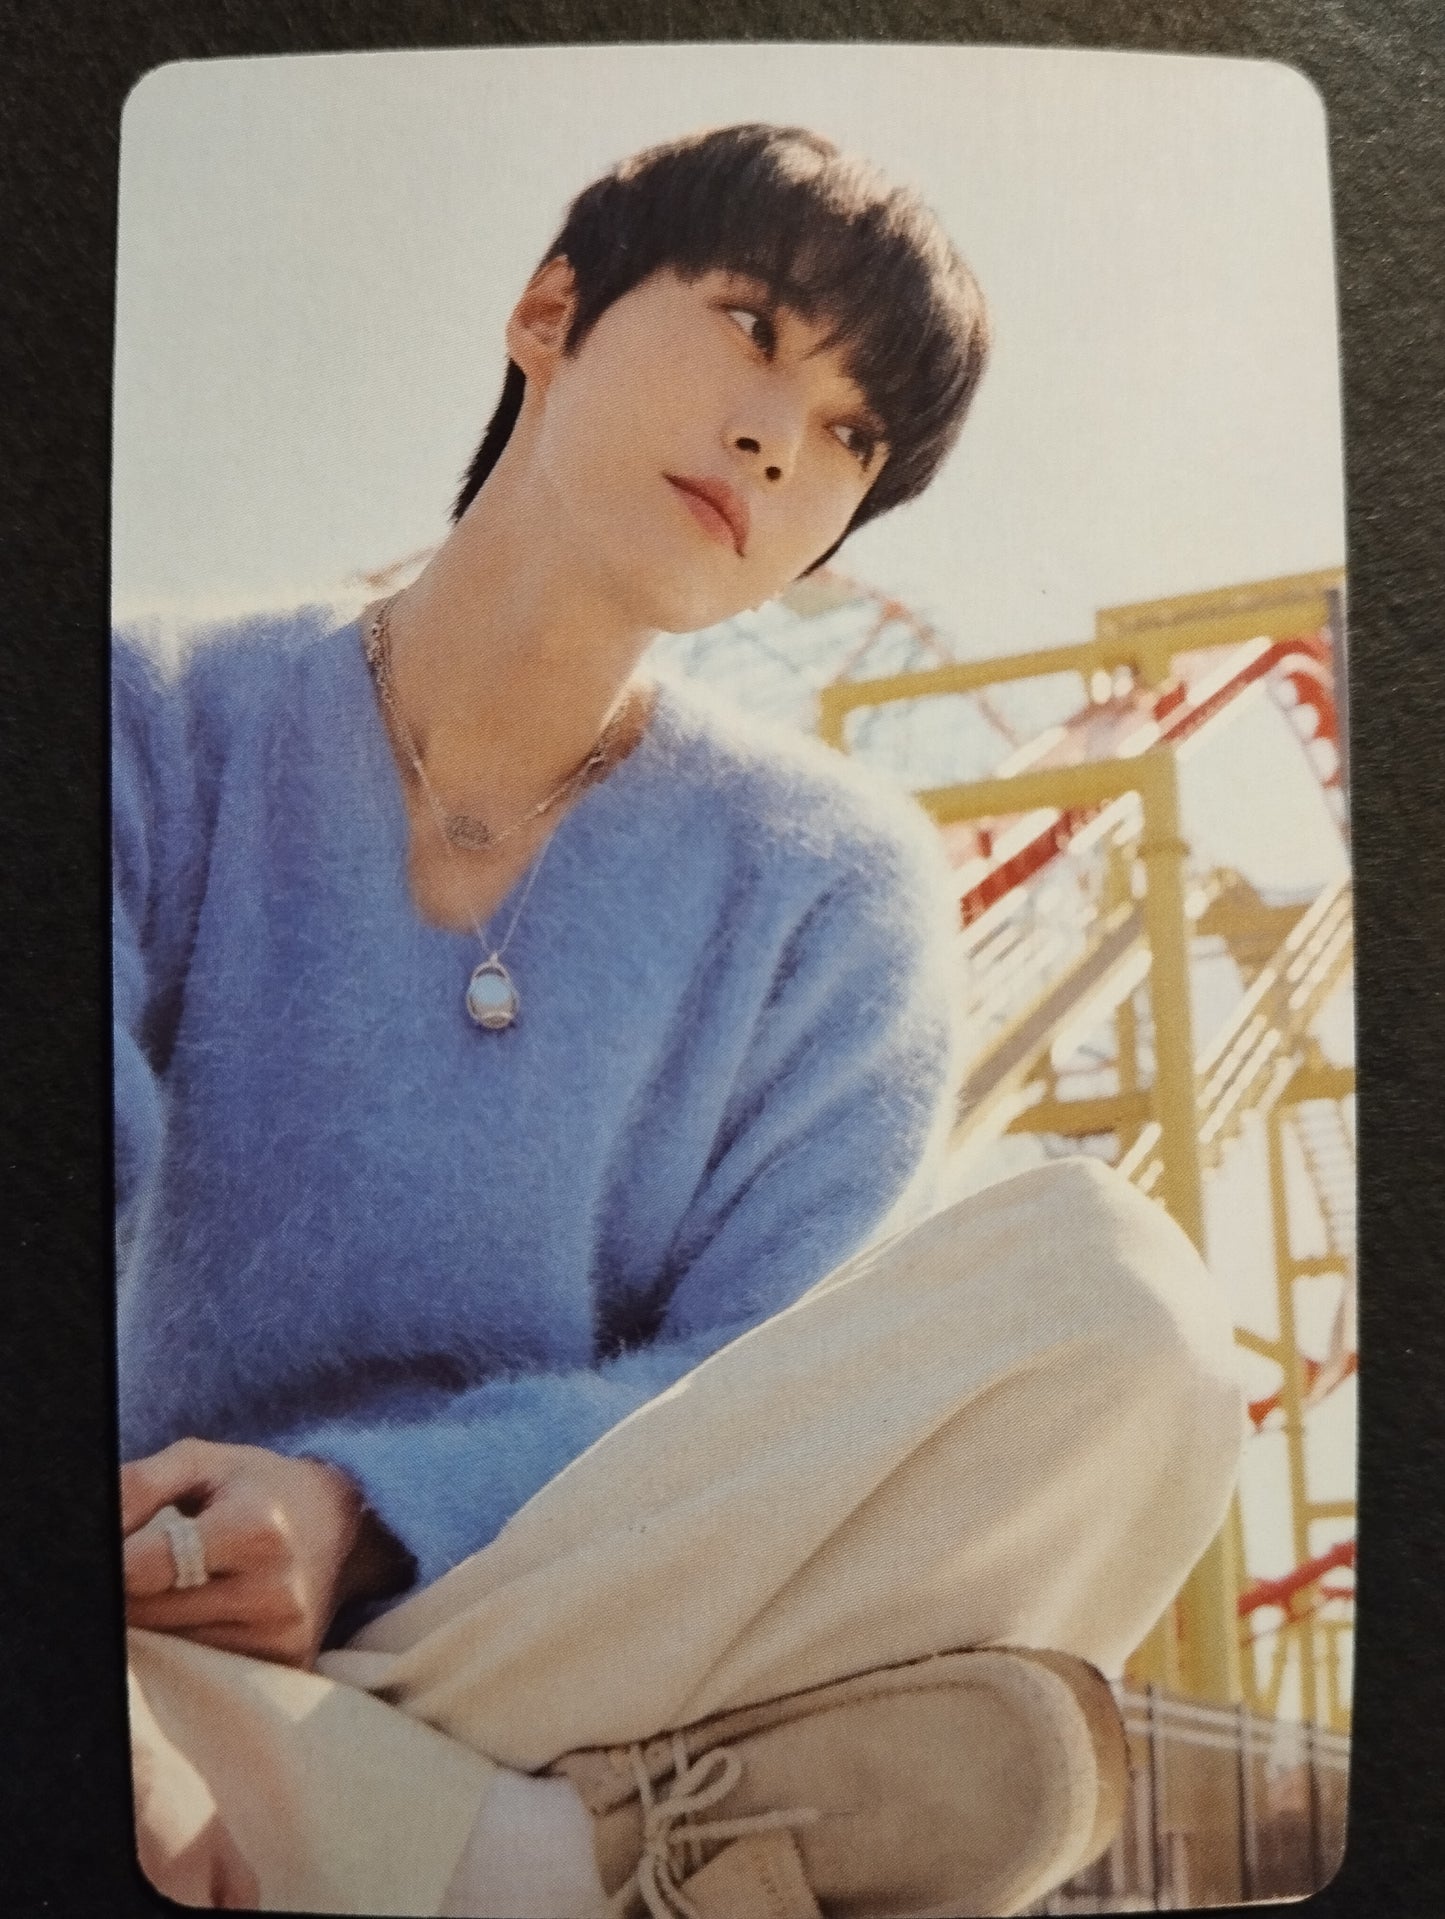 Photocard NCT Golden age Nation to the world Doyoung